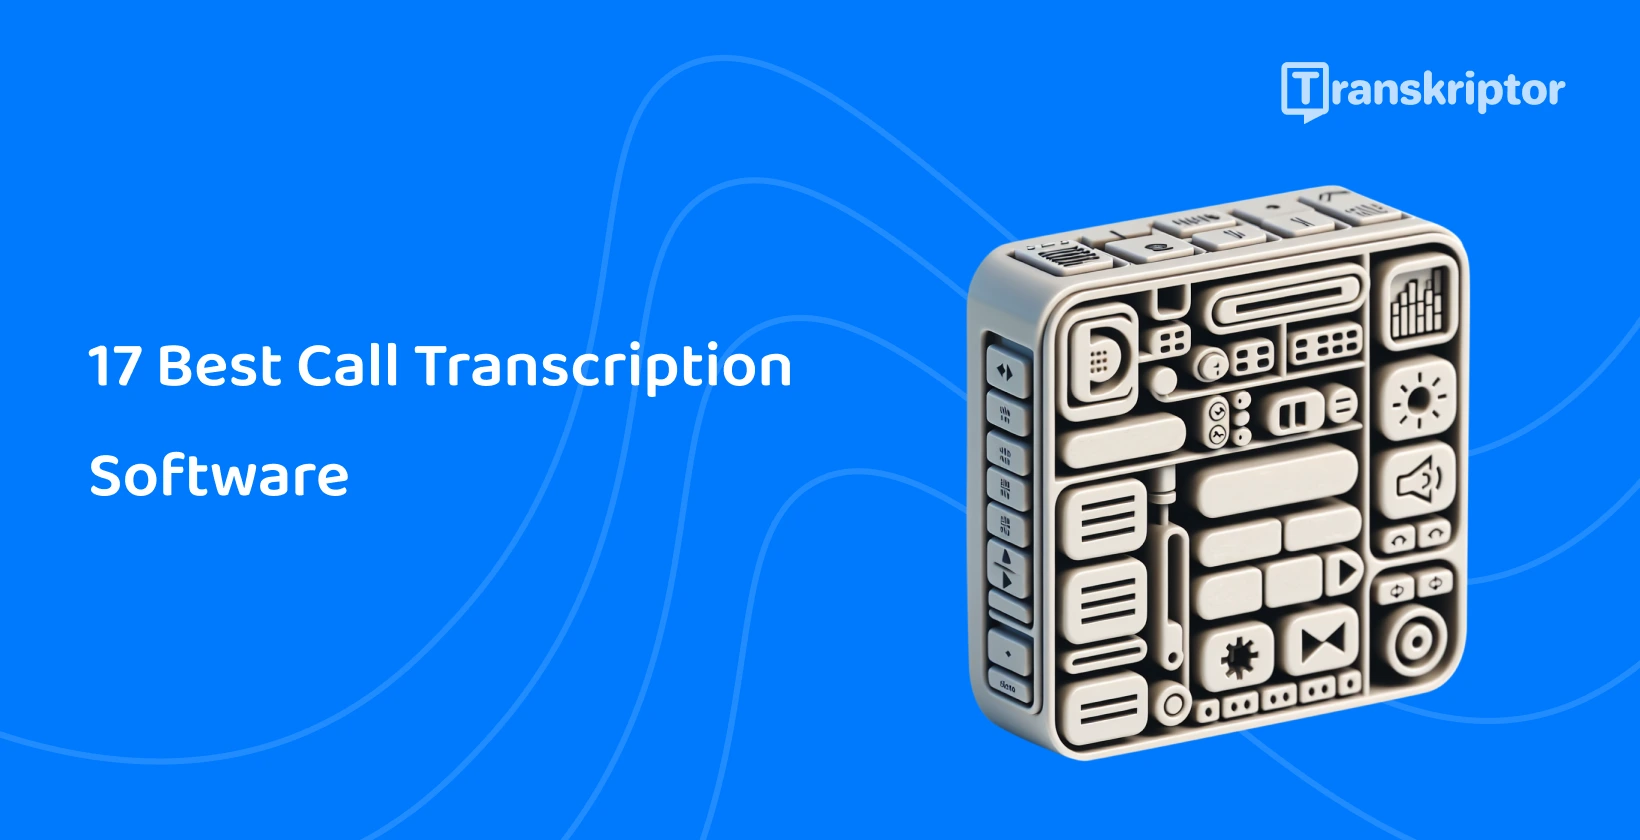 Call transcription software icons cube illustrating Transkriptor's efficient features.